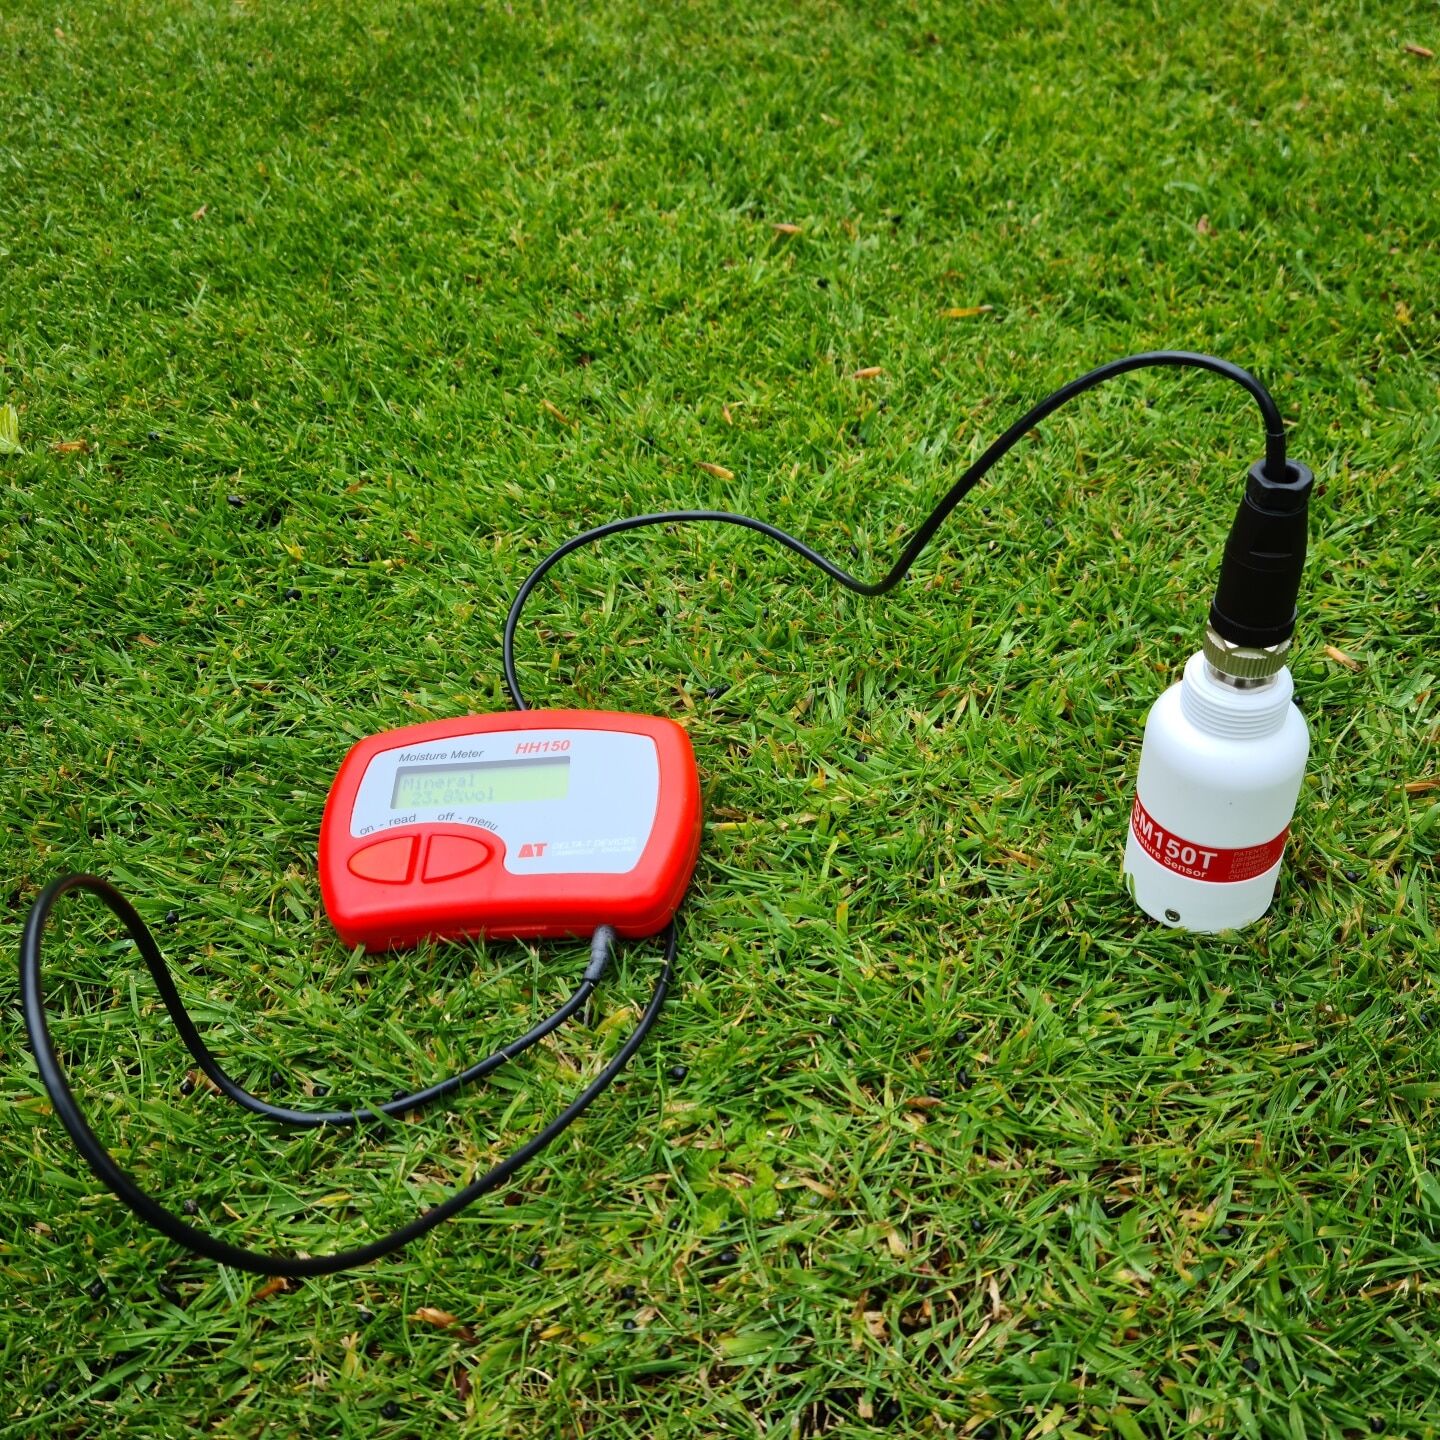 An electronic measuring device set on a lawn